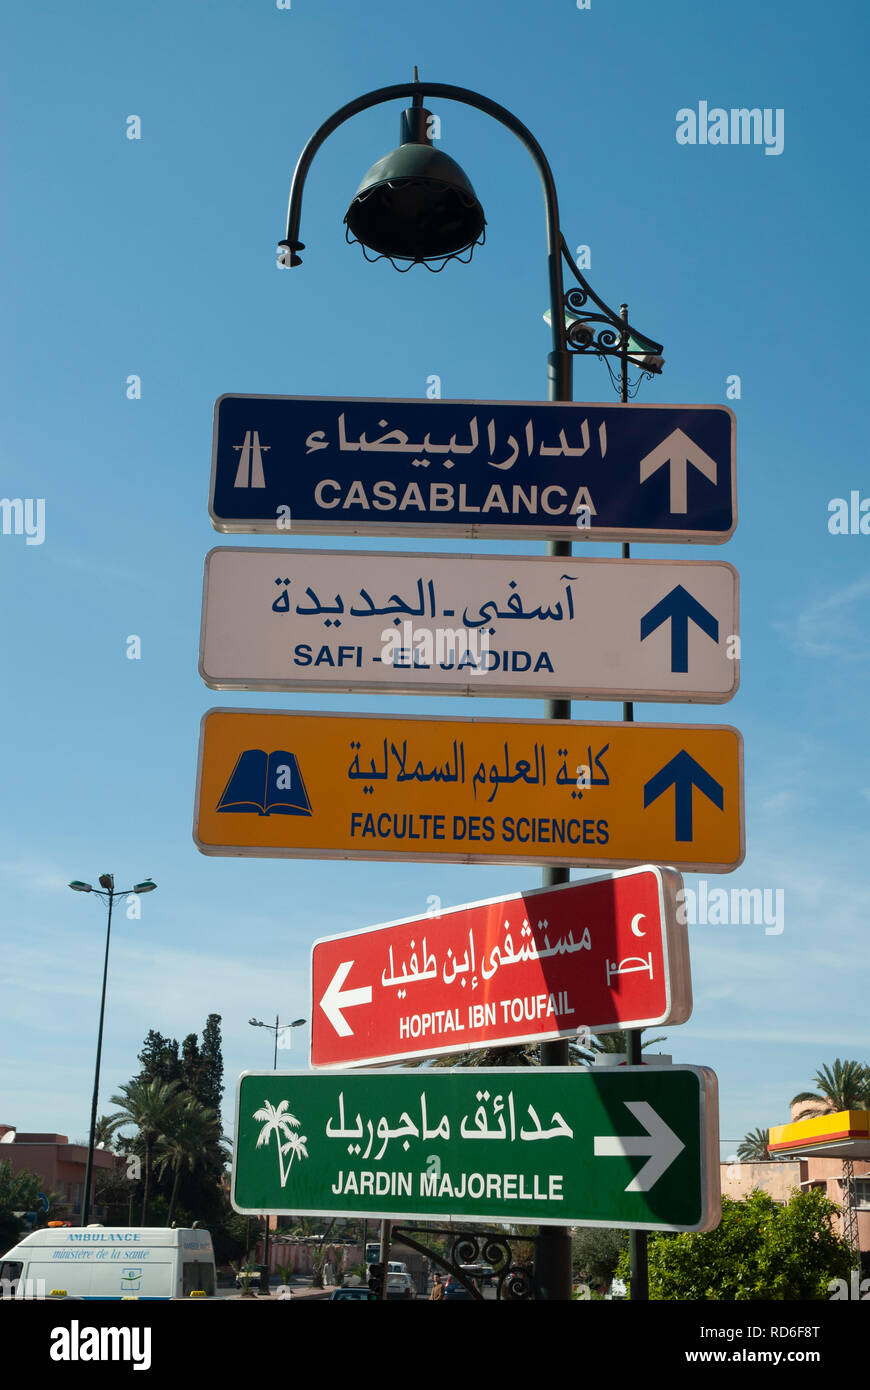 Street sign in Marrakech with directions to Casablanca, Morocco Stock Photo  - Alamy